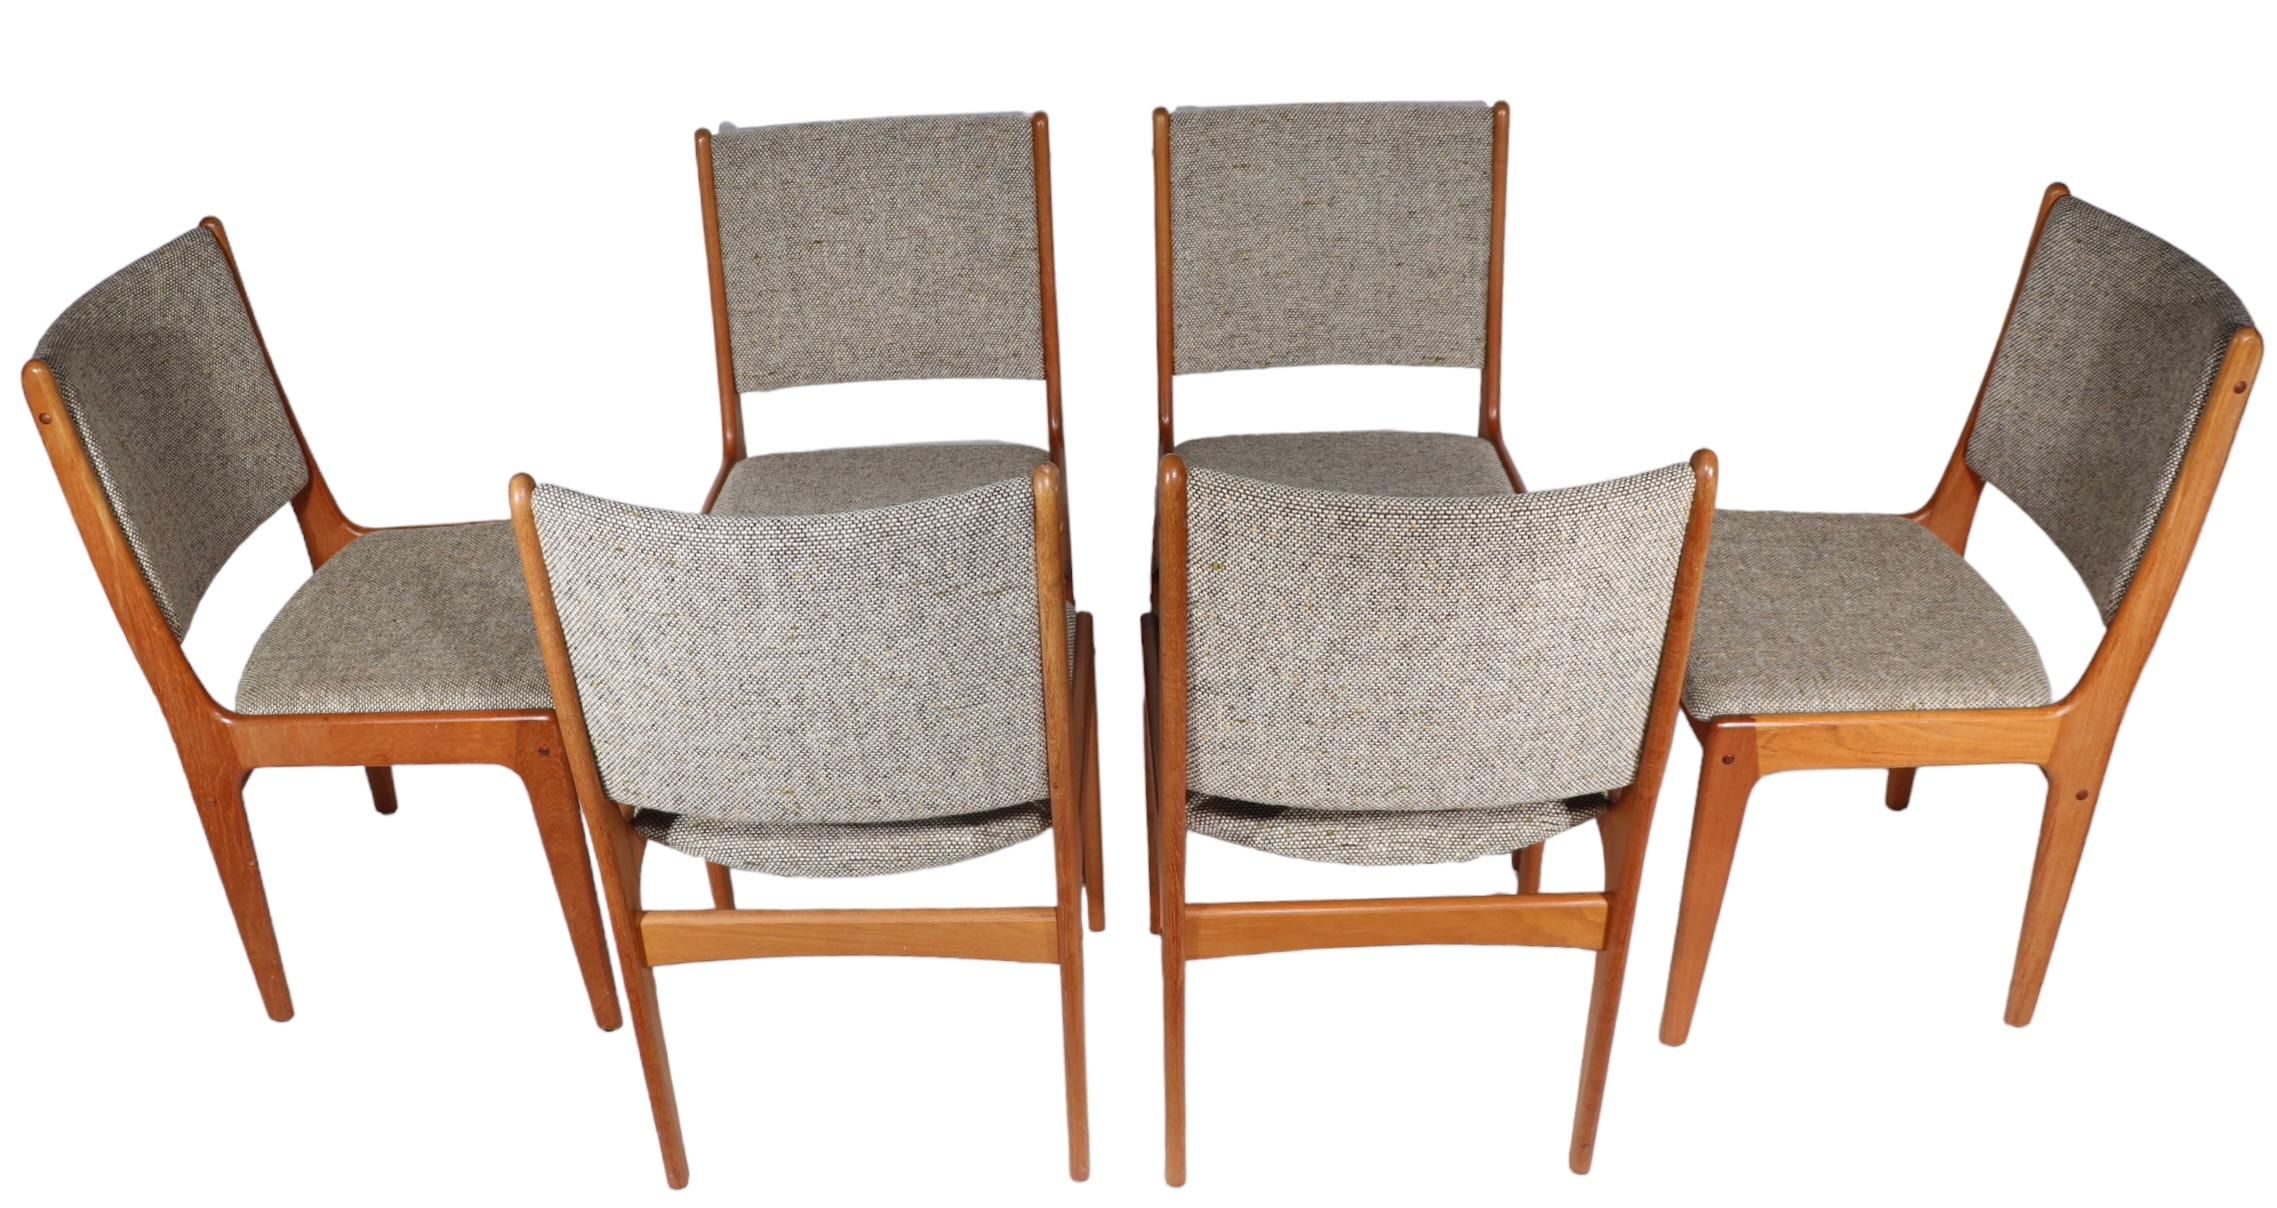 Upholstery Danish Mid Century Modern Dining Chairs by Johannes Andersen for Uldum Mobler  For Sale